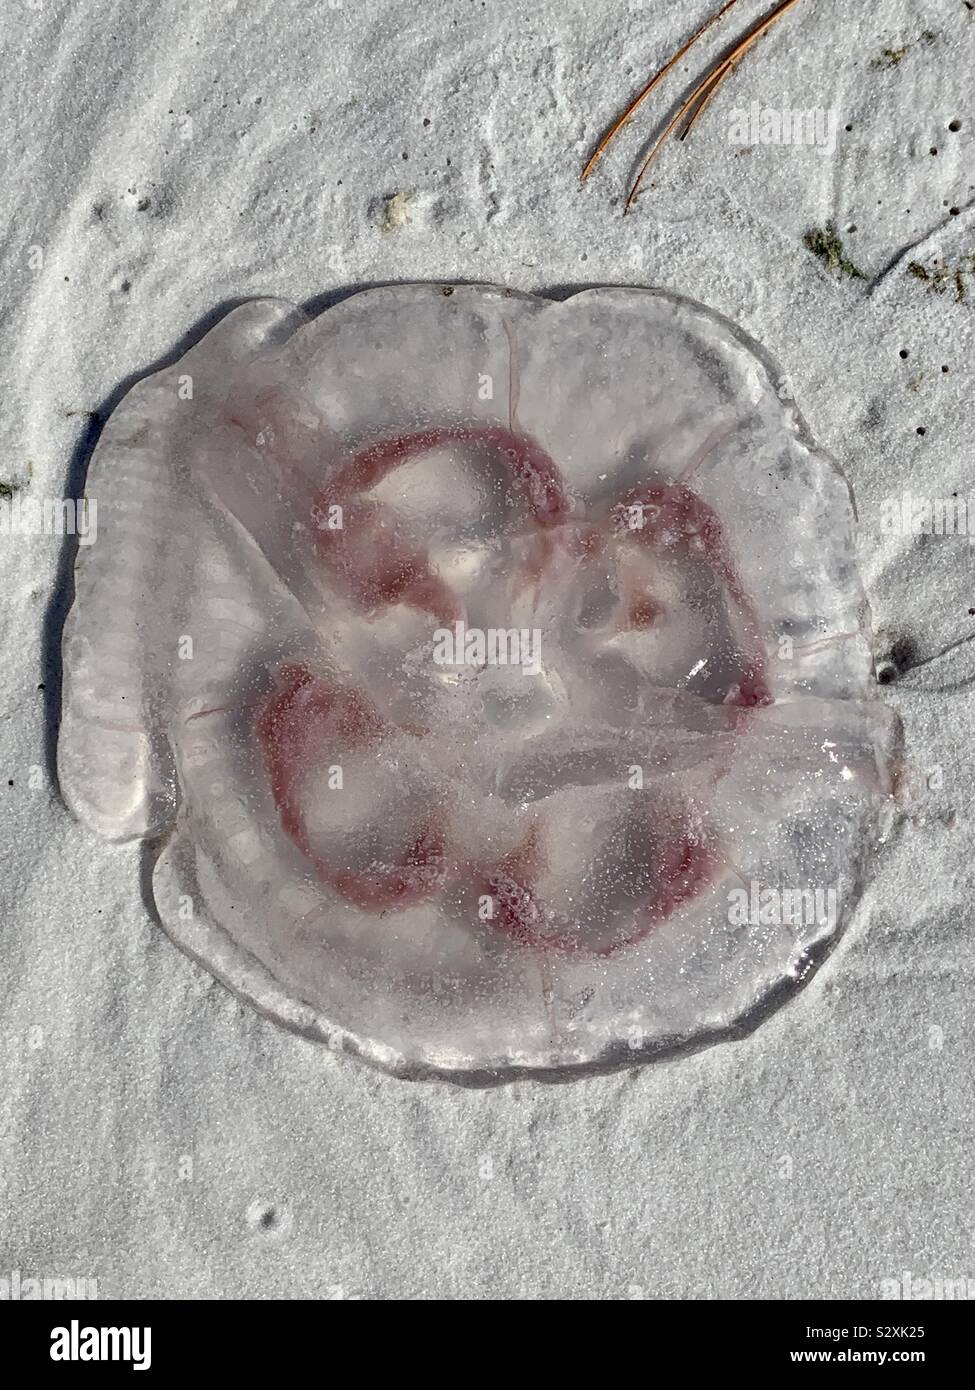 Moon jelly fish with pink center on white sand beach Stock Photo